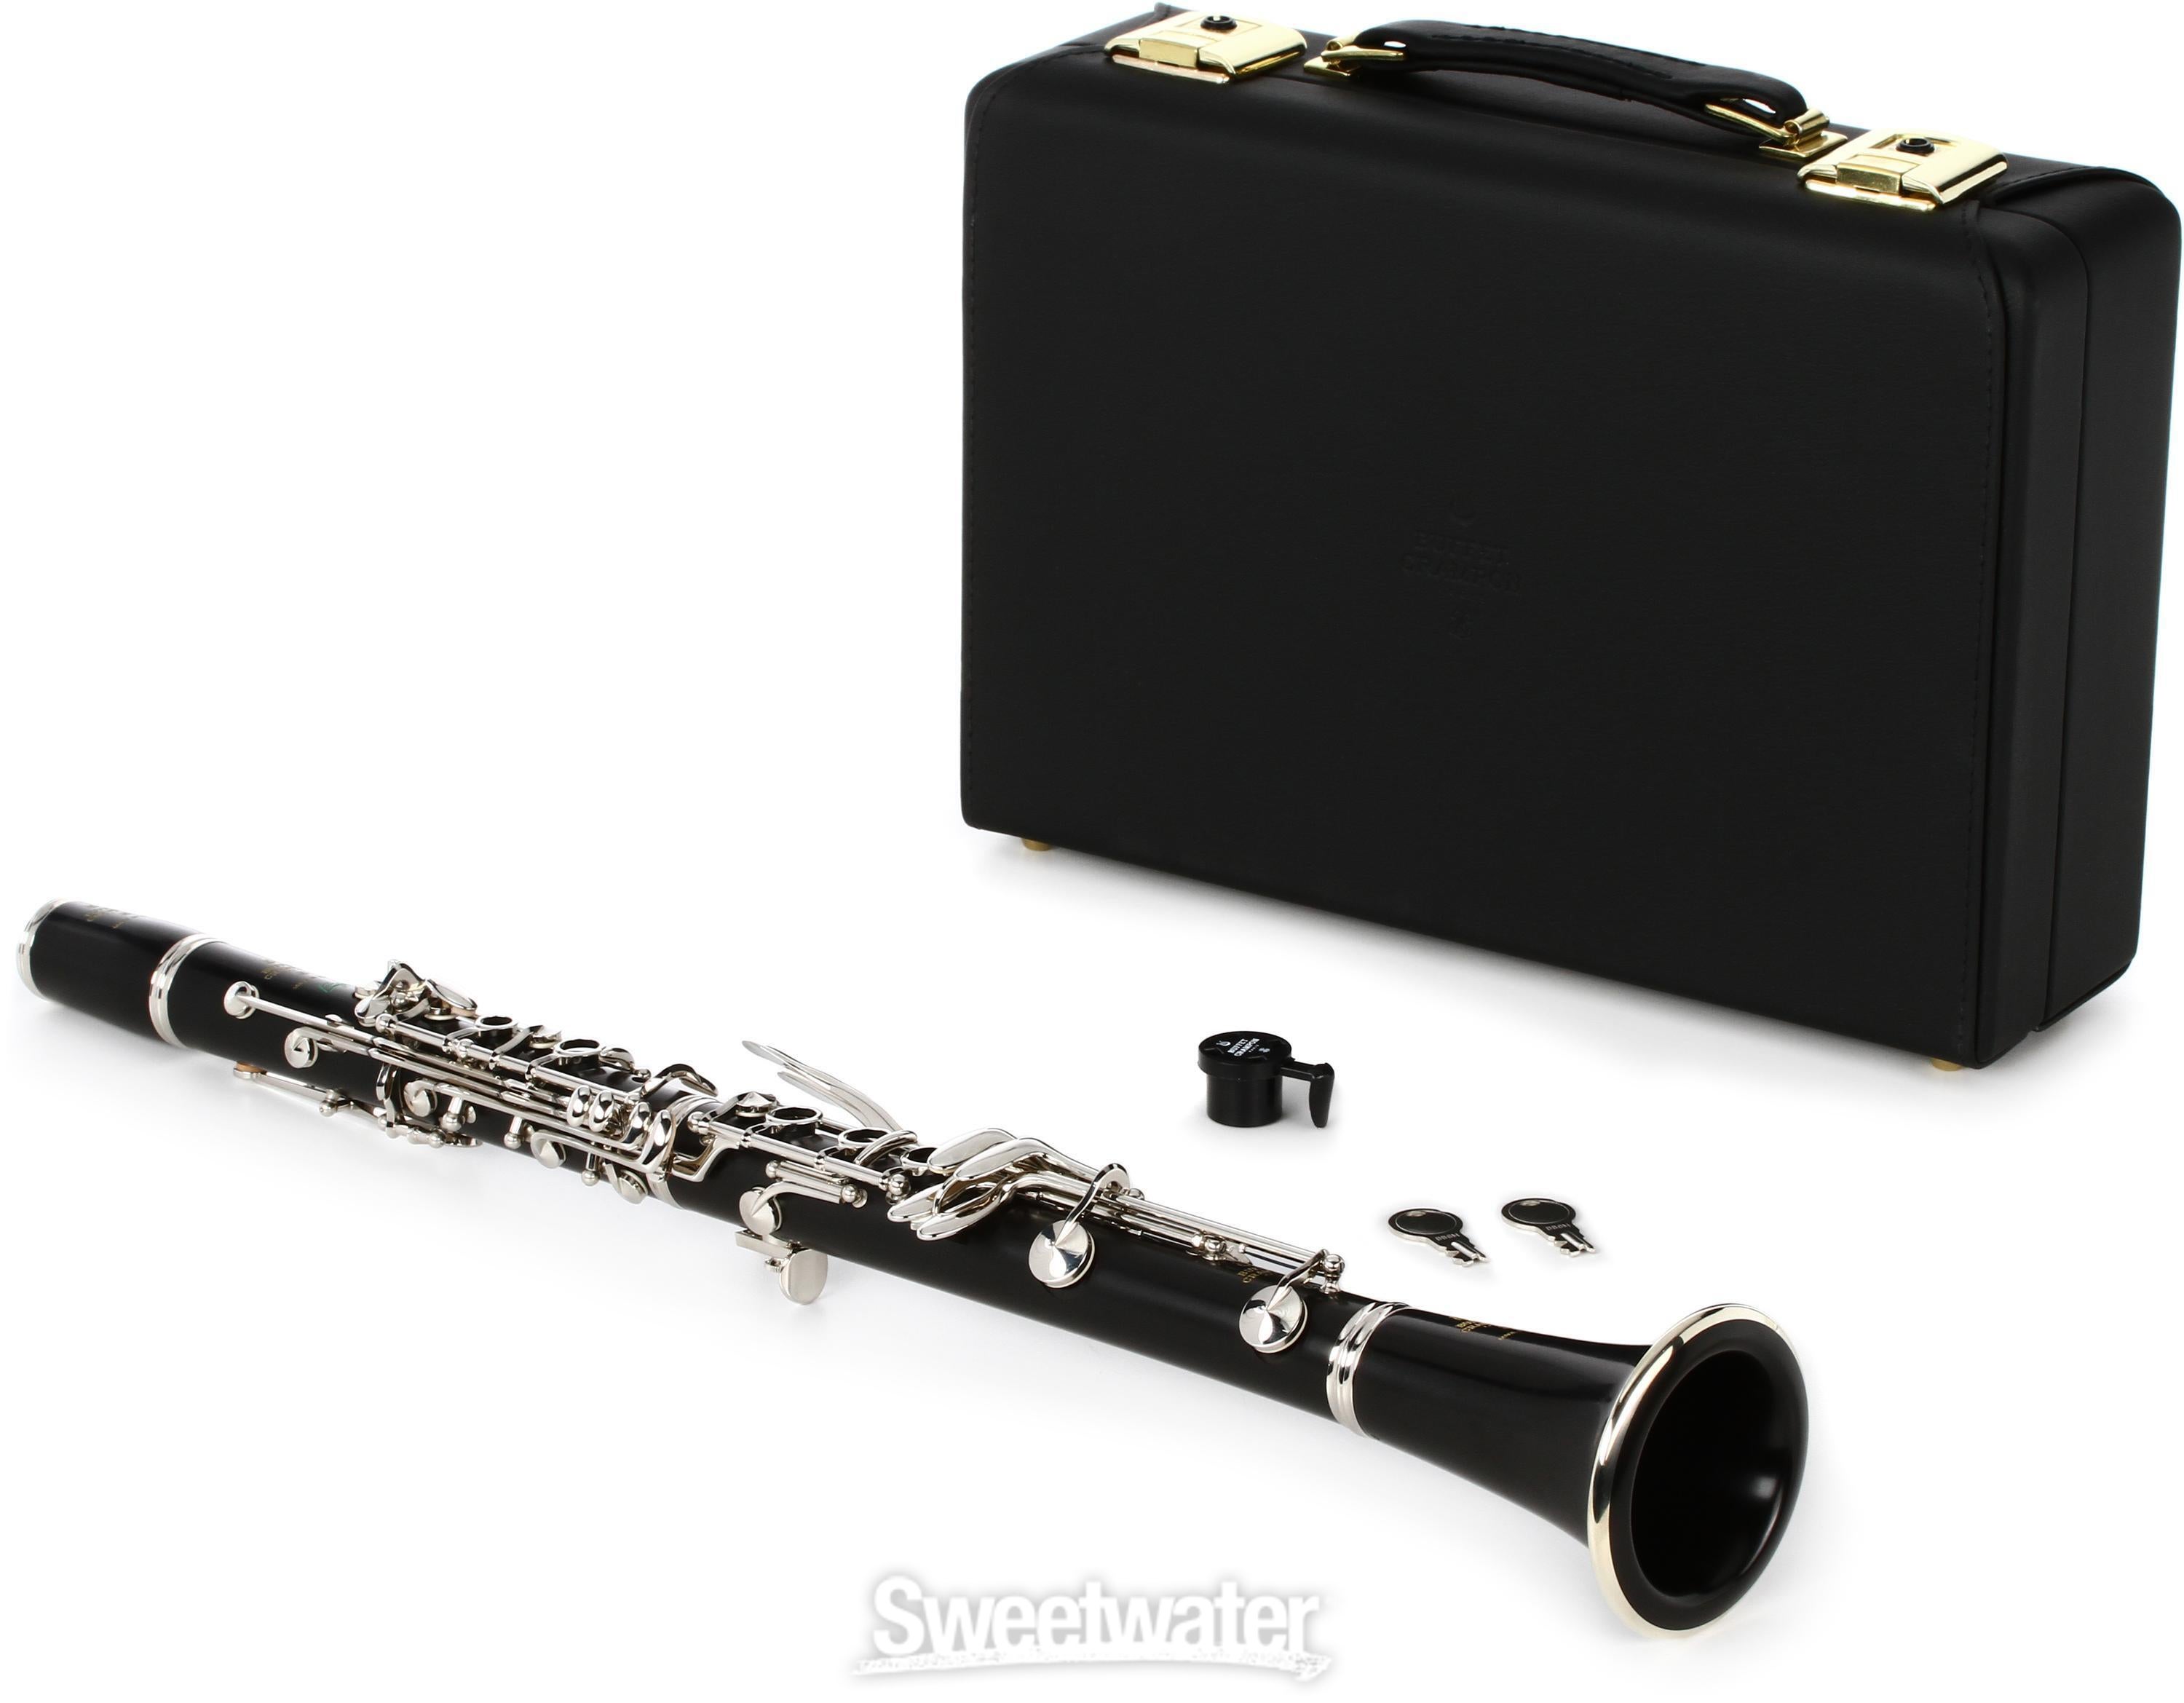 Buffet Crampon R13 Greenline Professional Bb Clarinet | Sweetwater